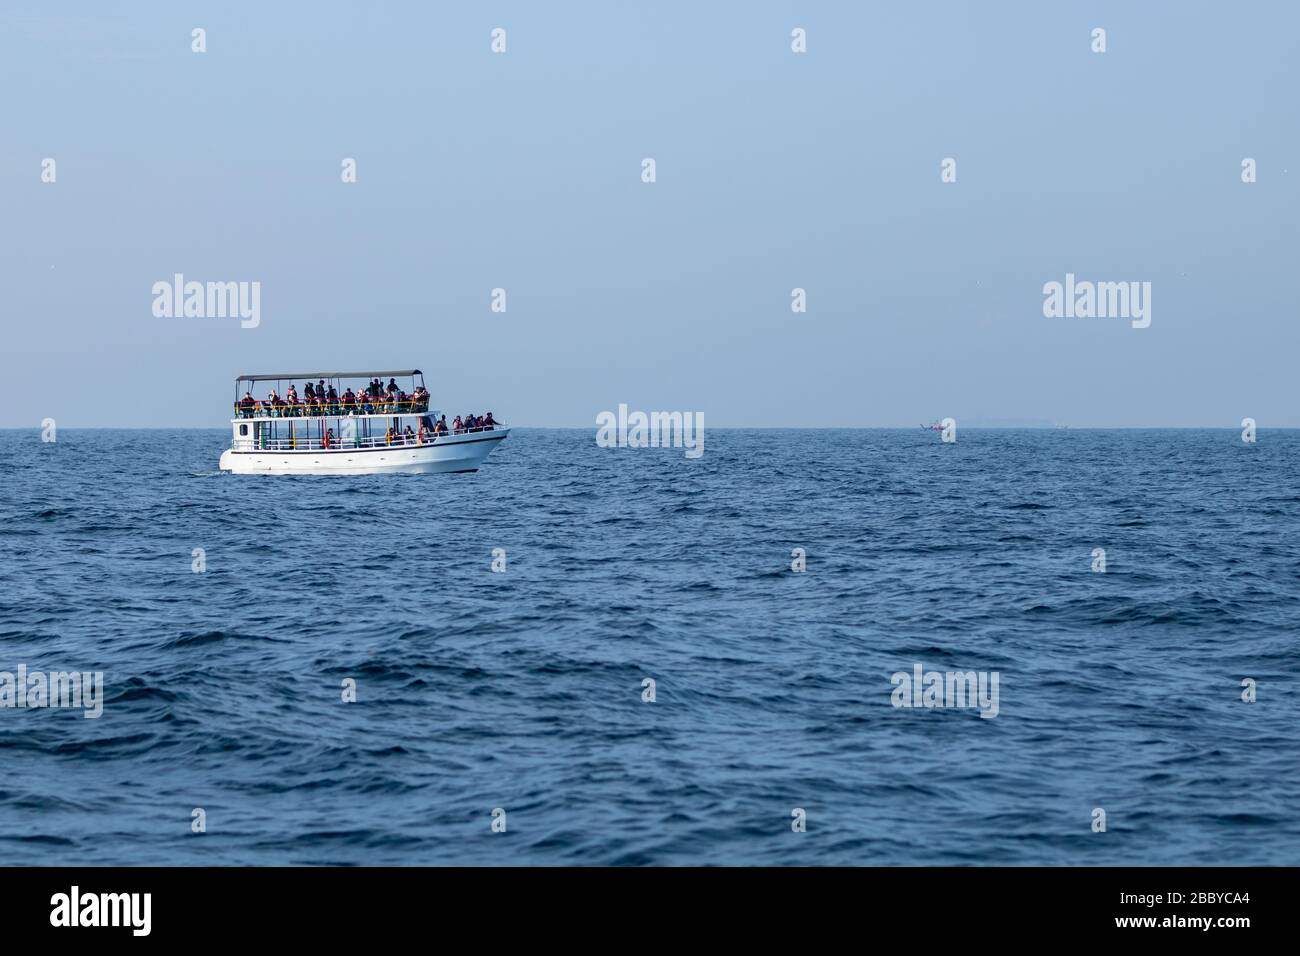 Whale and Dolphin watching on Ship in deep blue ocean as entertainment and tourism activity Stock Photo